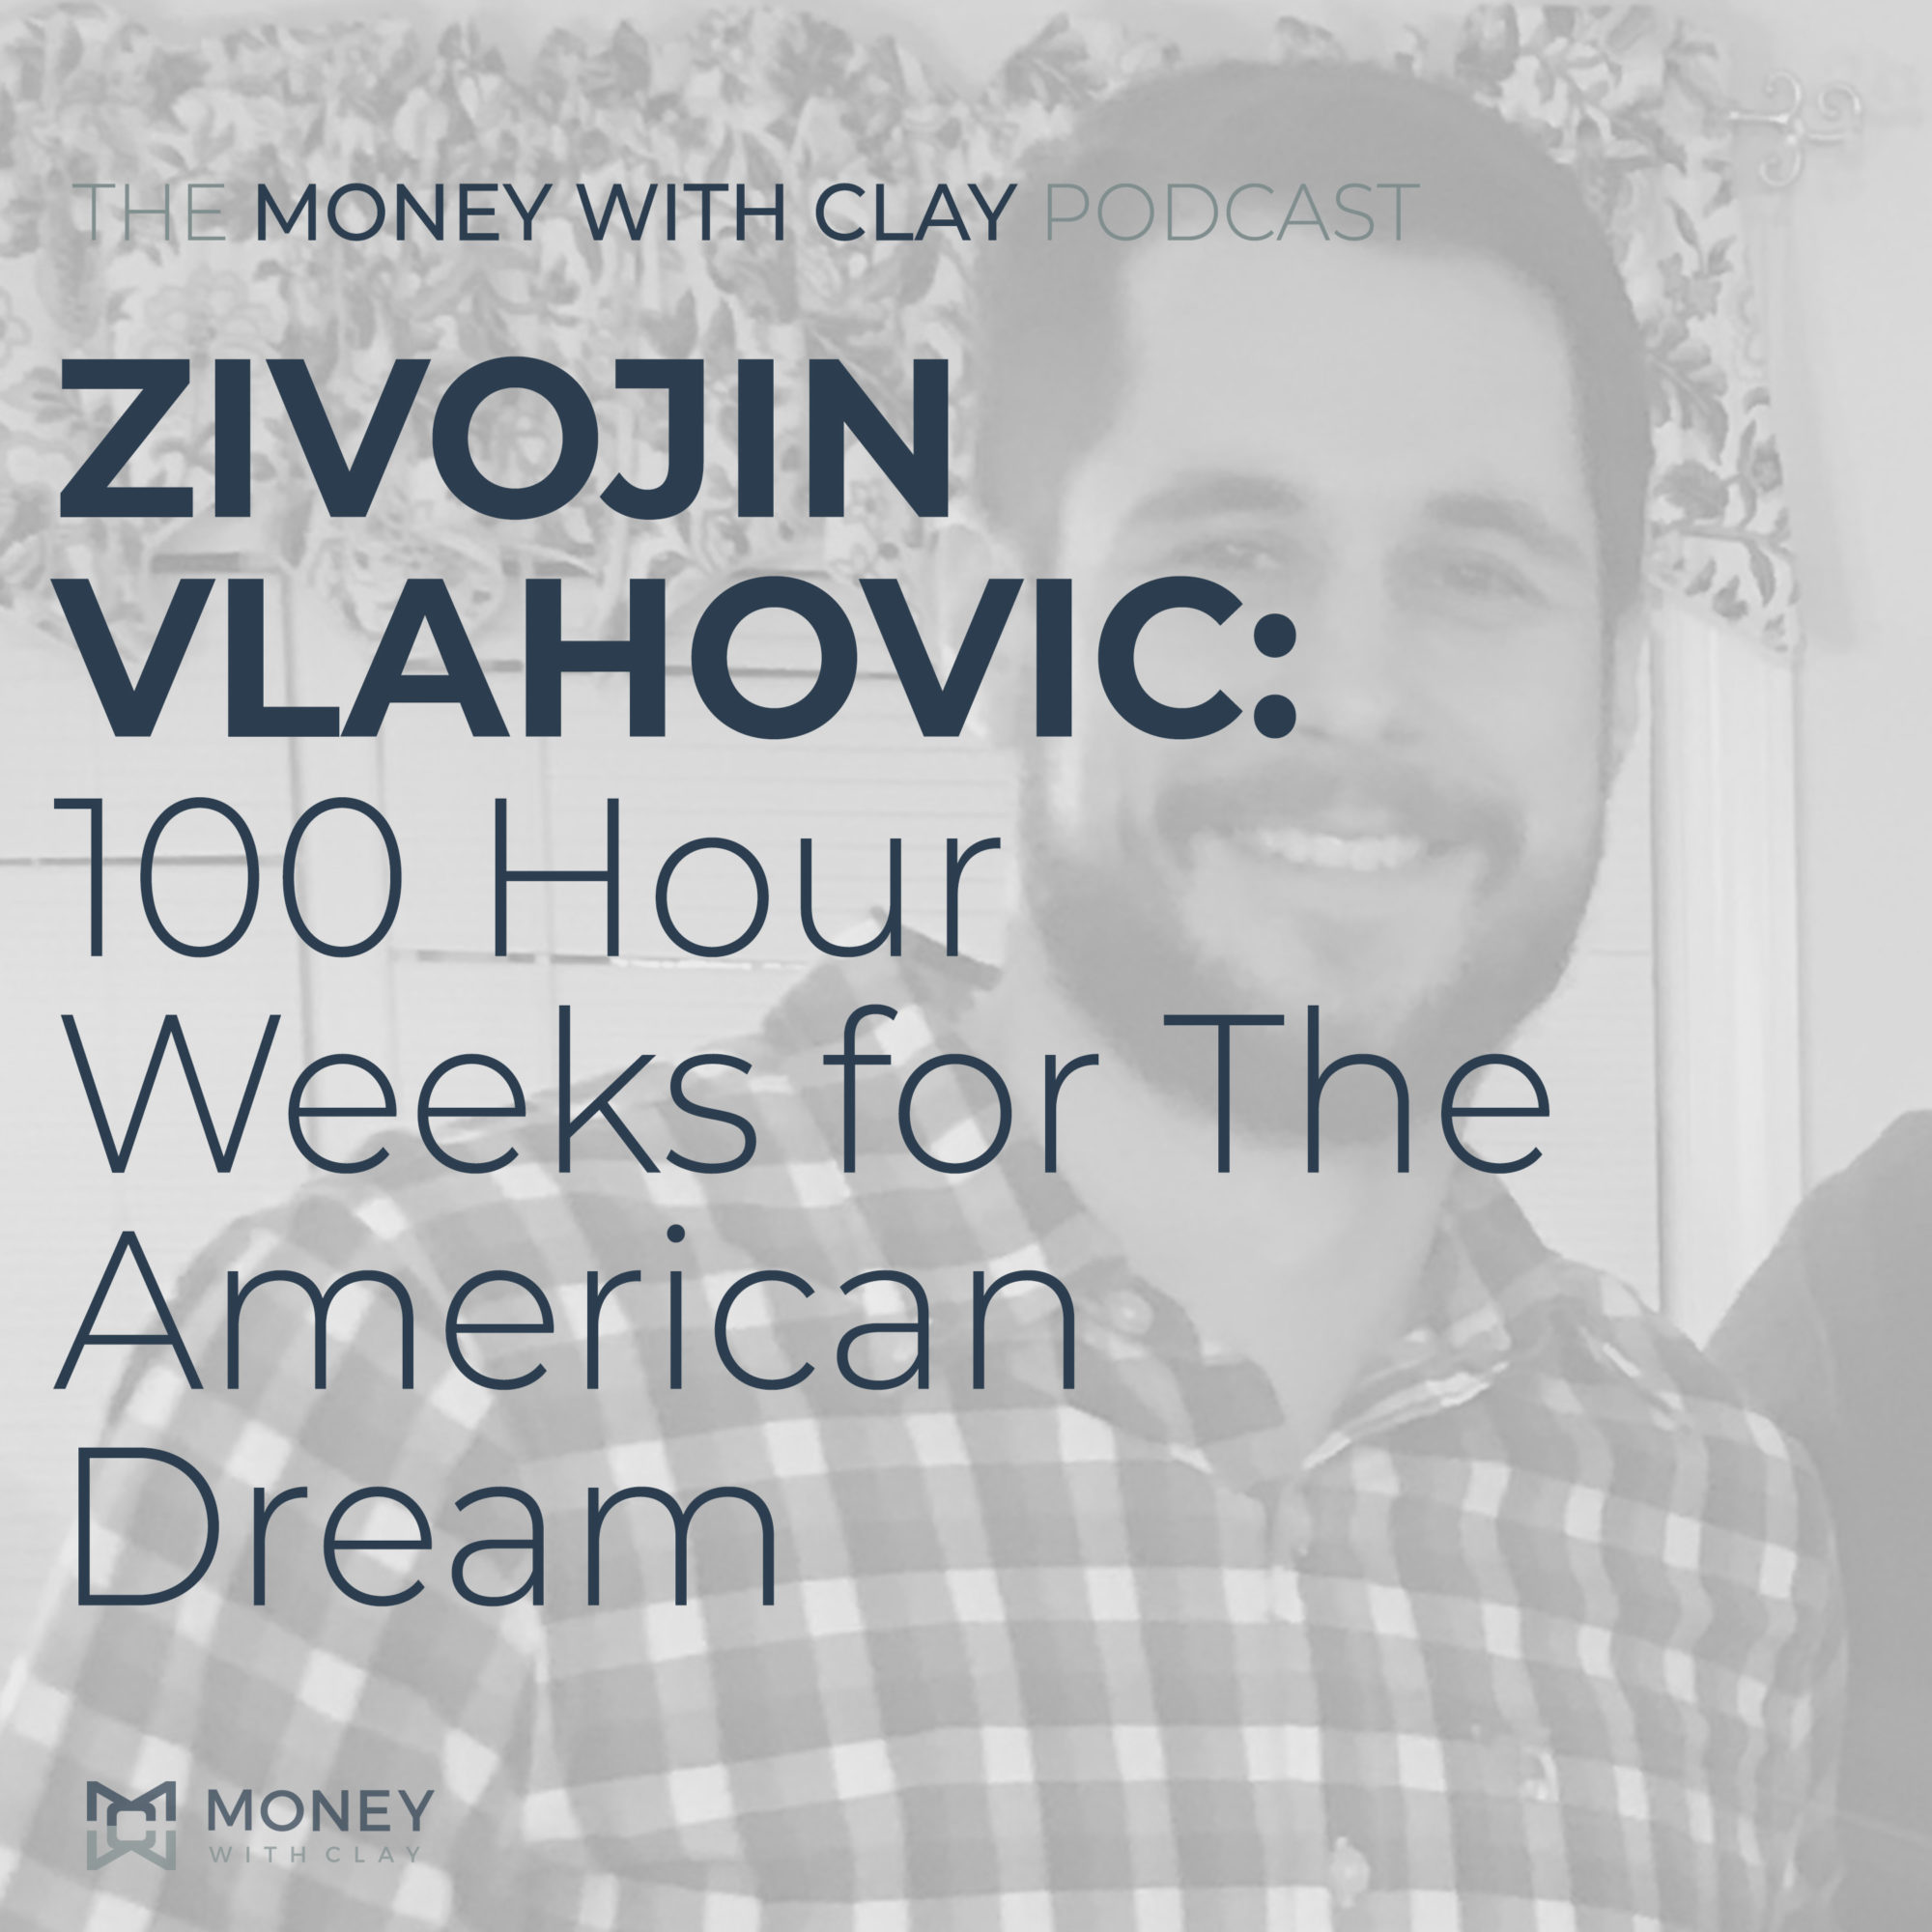 Zivojin Vlahovic: 100 Hour Weeks for The American Dream